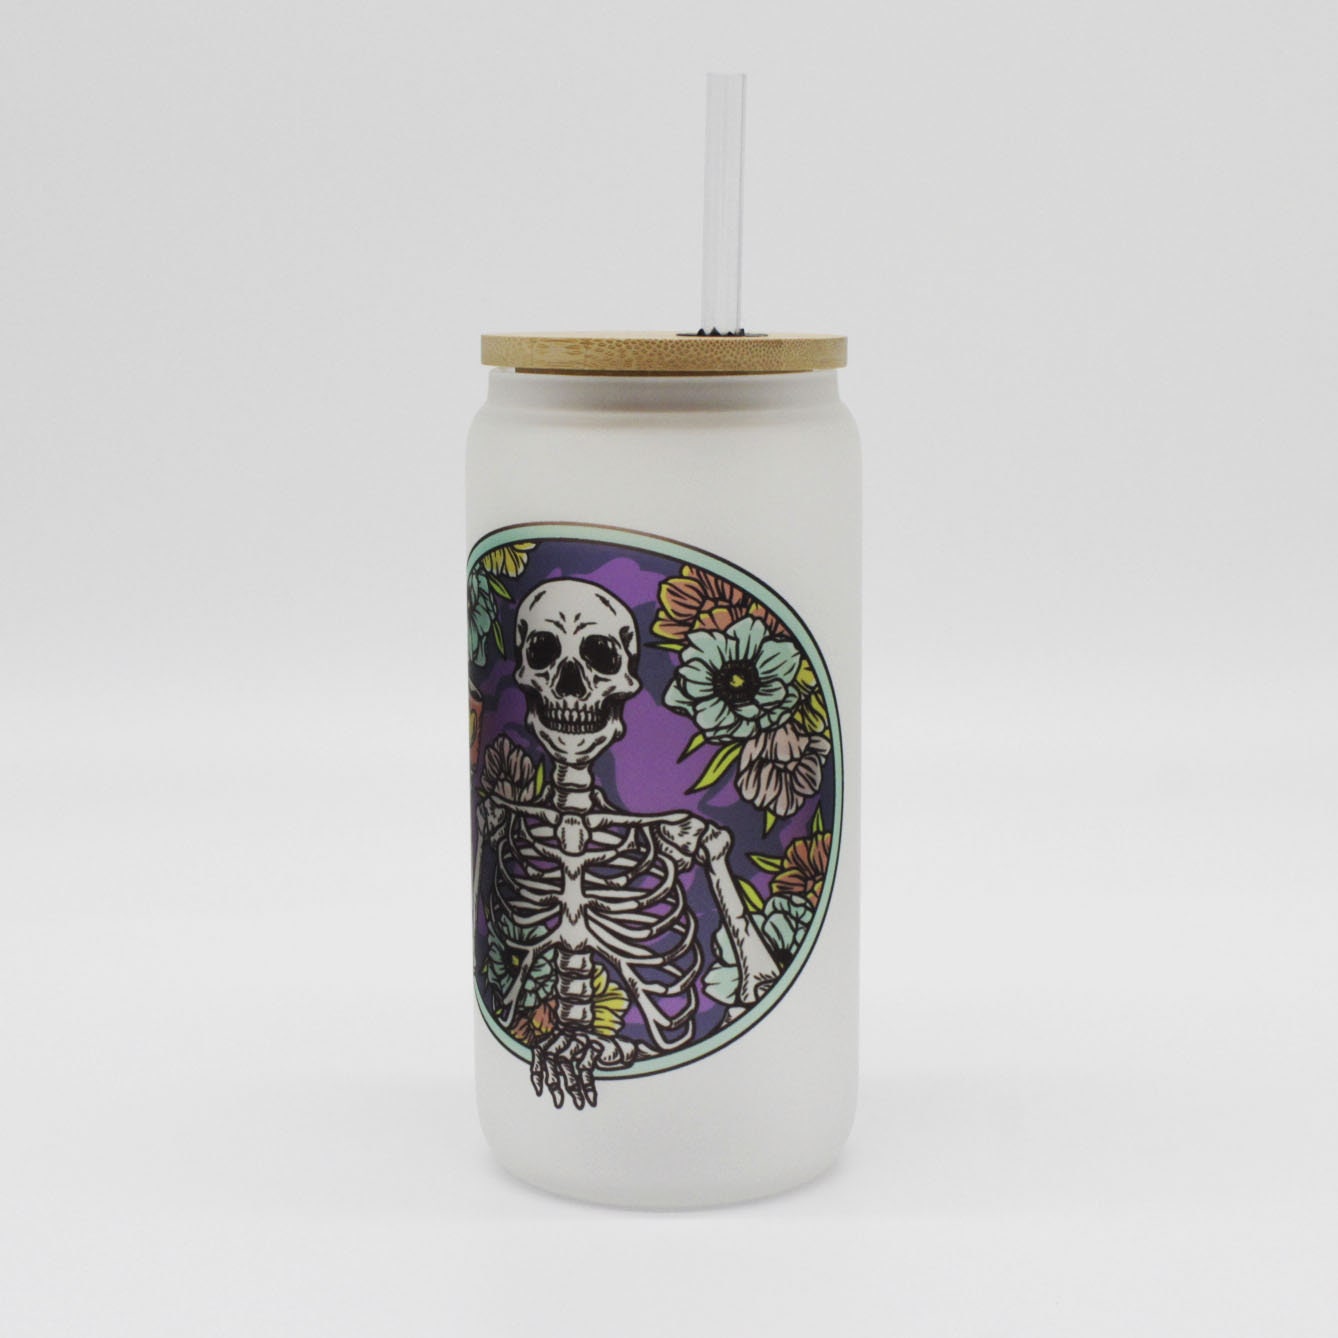 Dead Without Coffee 18oz frosted glass cup colorful skeleton design w/  bamboo lid & straw